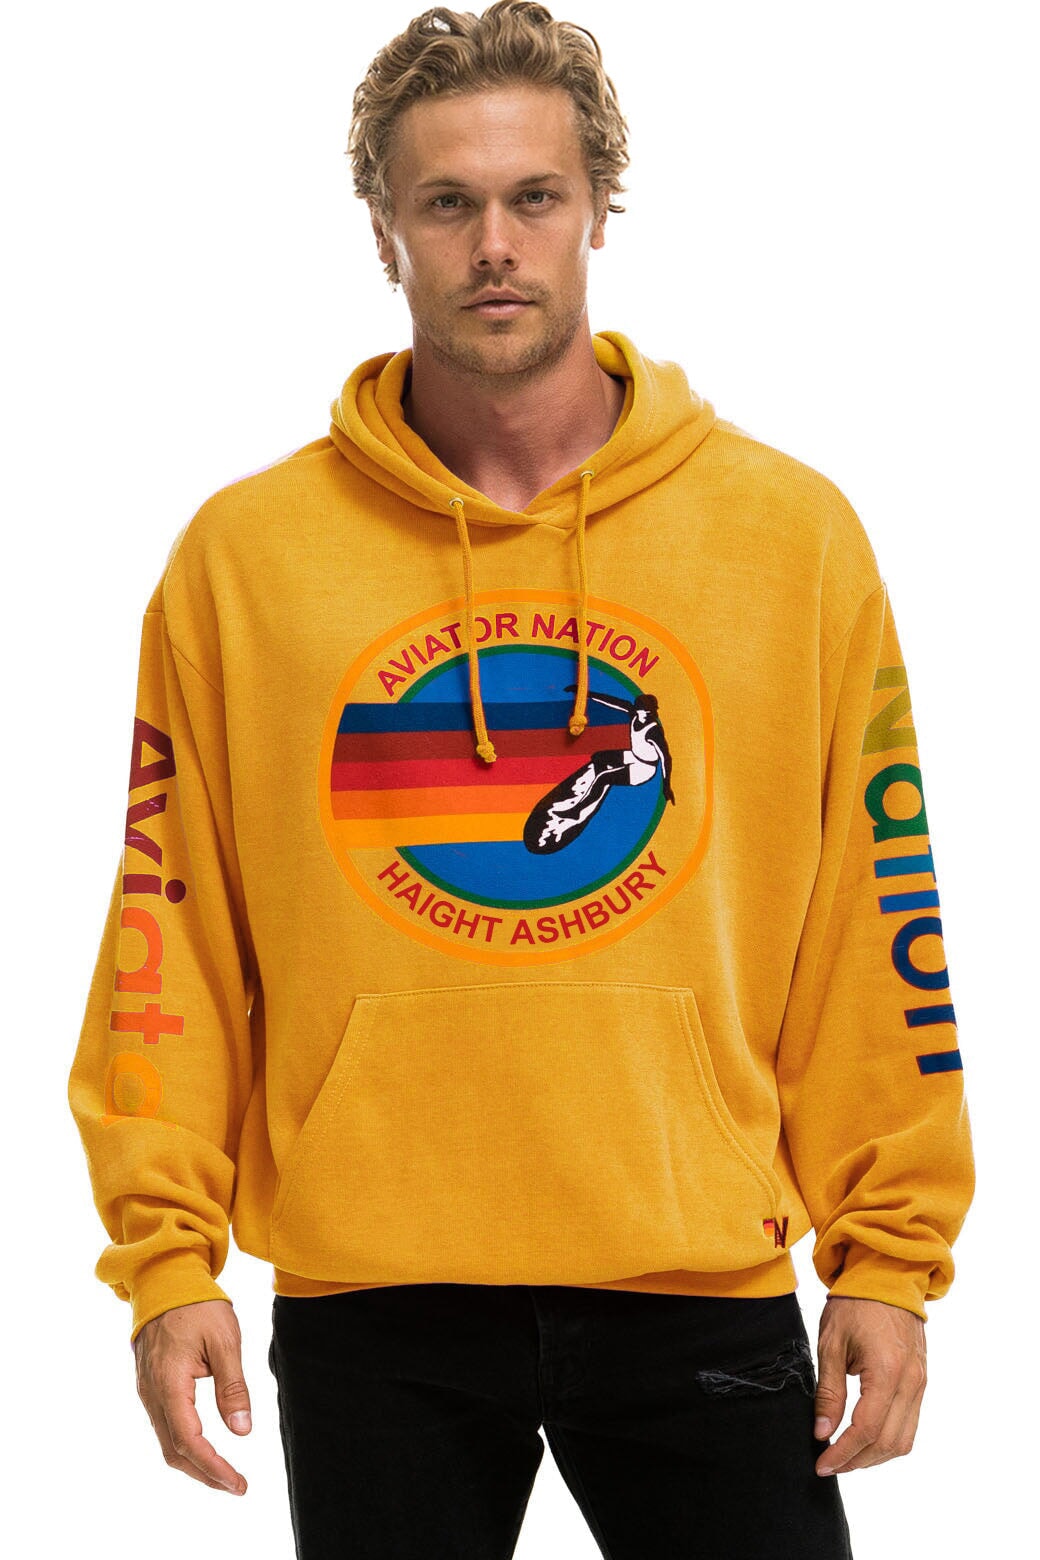 AVIATOR NATION HAIGHT ASHBURY RELAXED PULLOVER HOODIE - GOLD Hoodie Aviator Nation 